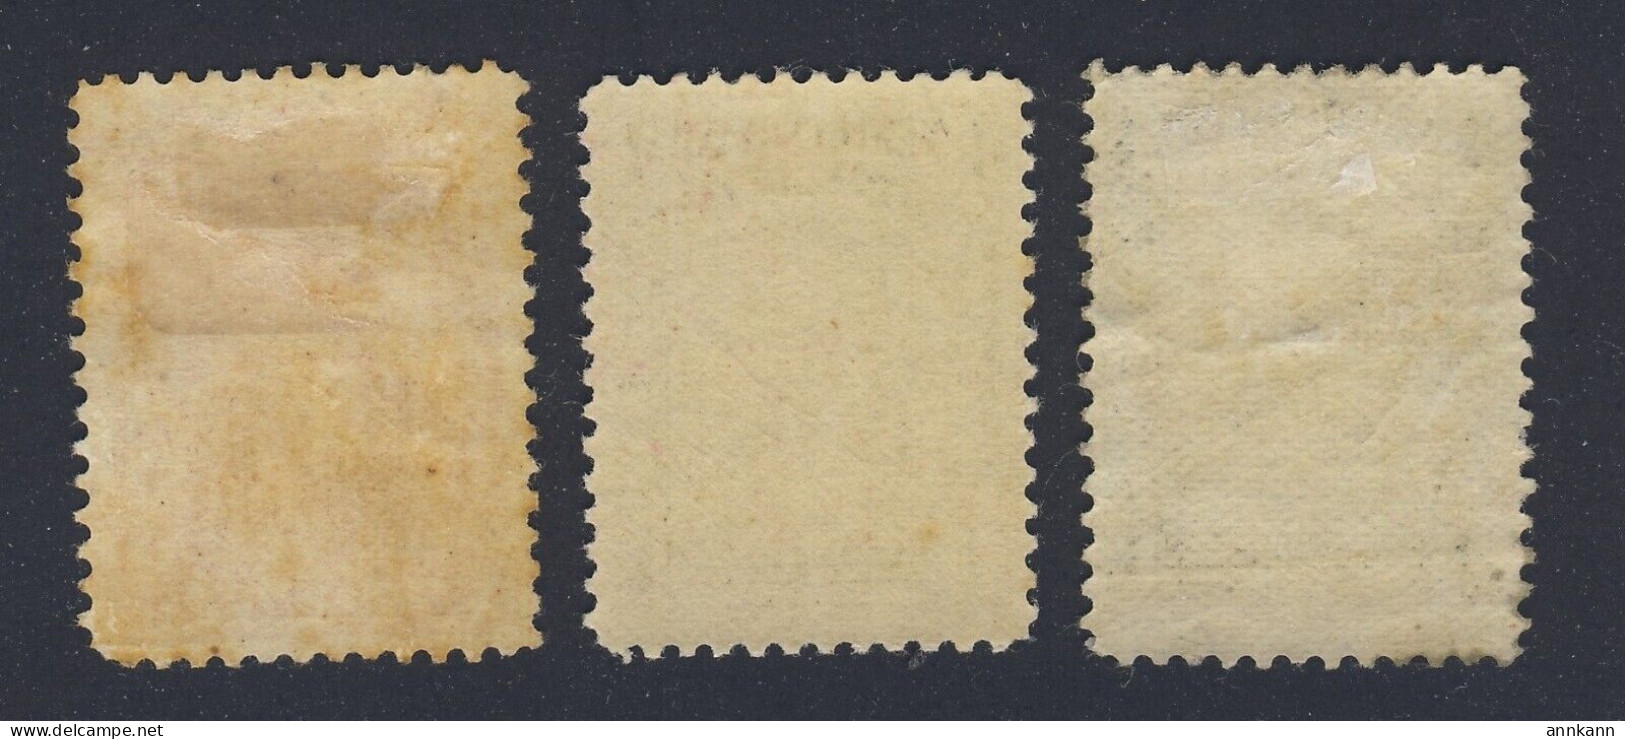 3x Newfoundland MH Stamps; #62-2c 2x#64-4c All Are MH F/VF Guide Value = $26.00 - 1857-1861